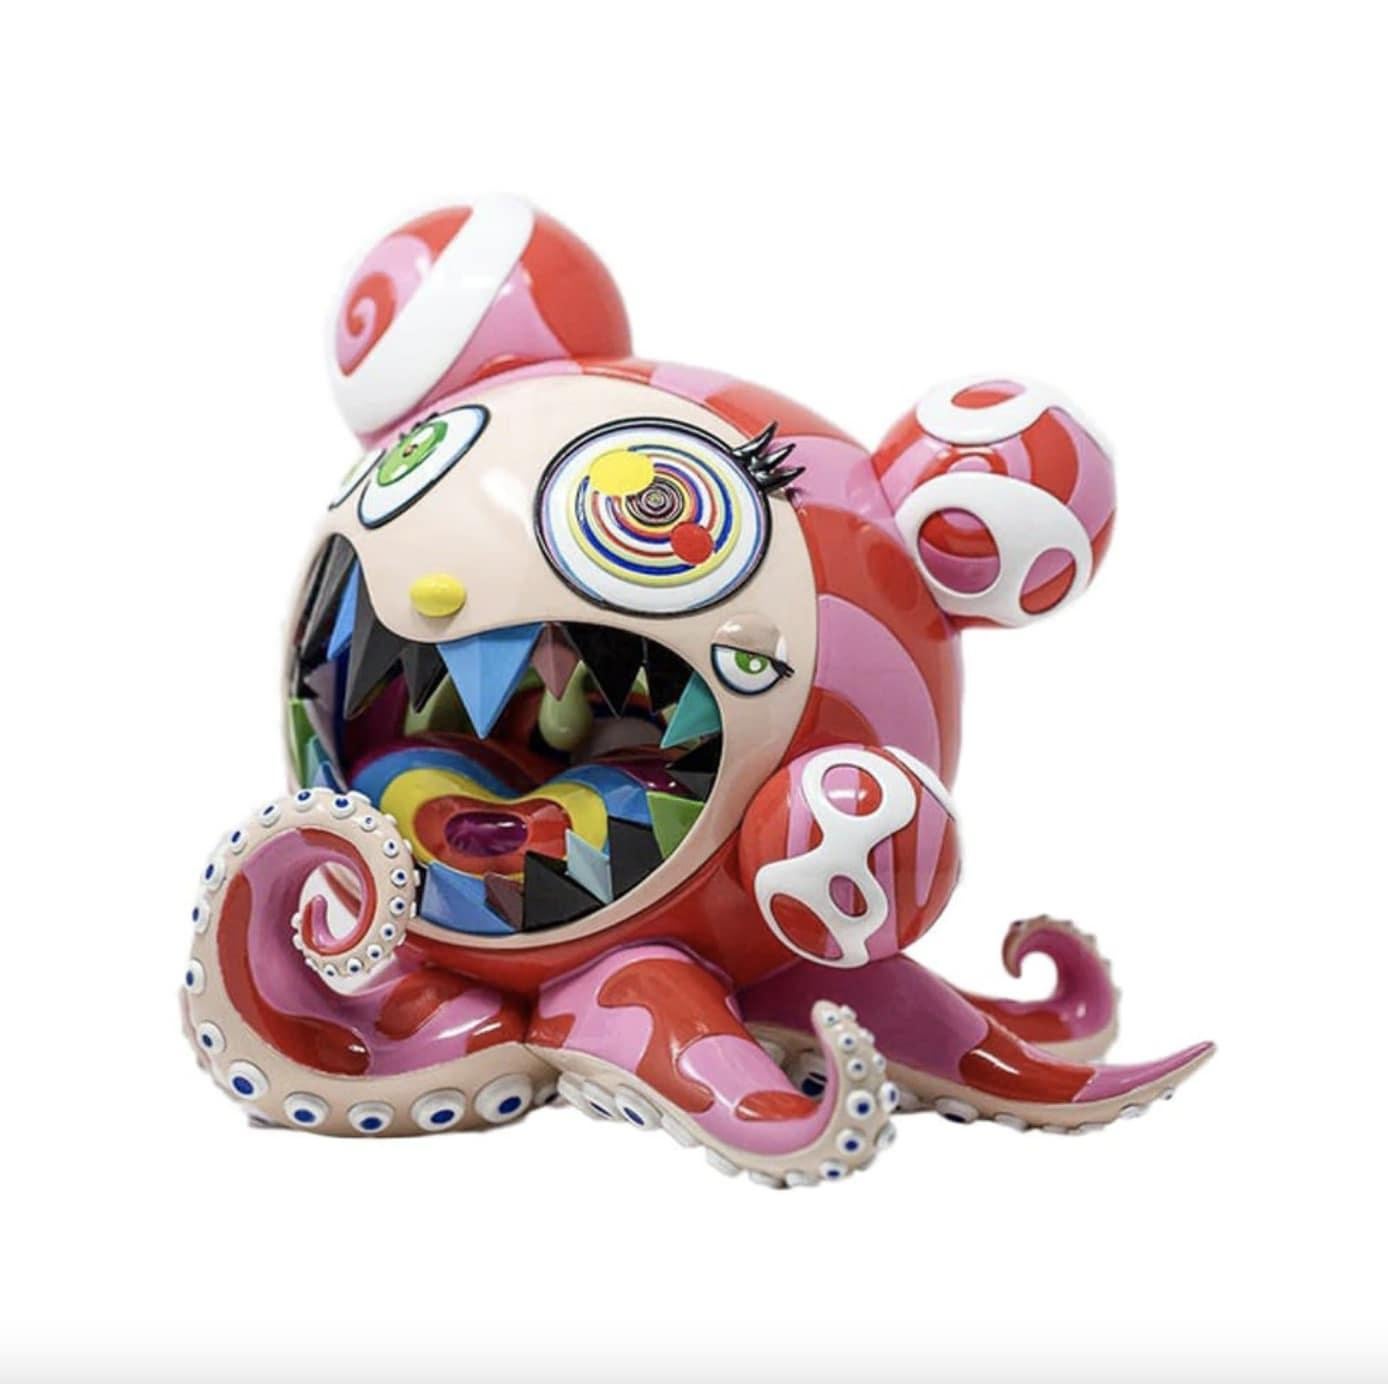 Takashi Murakami

Painted cast vinyl, edition of 400

27 x 34 x 26 cm (10 1/2  x 13 x 10 in)

Sold in 'as new' condition, in original box as issued.